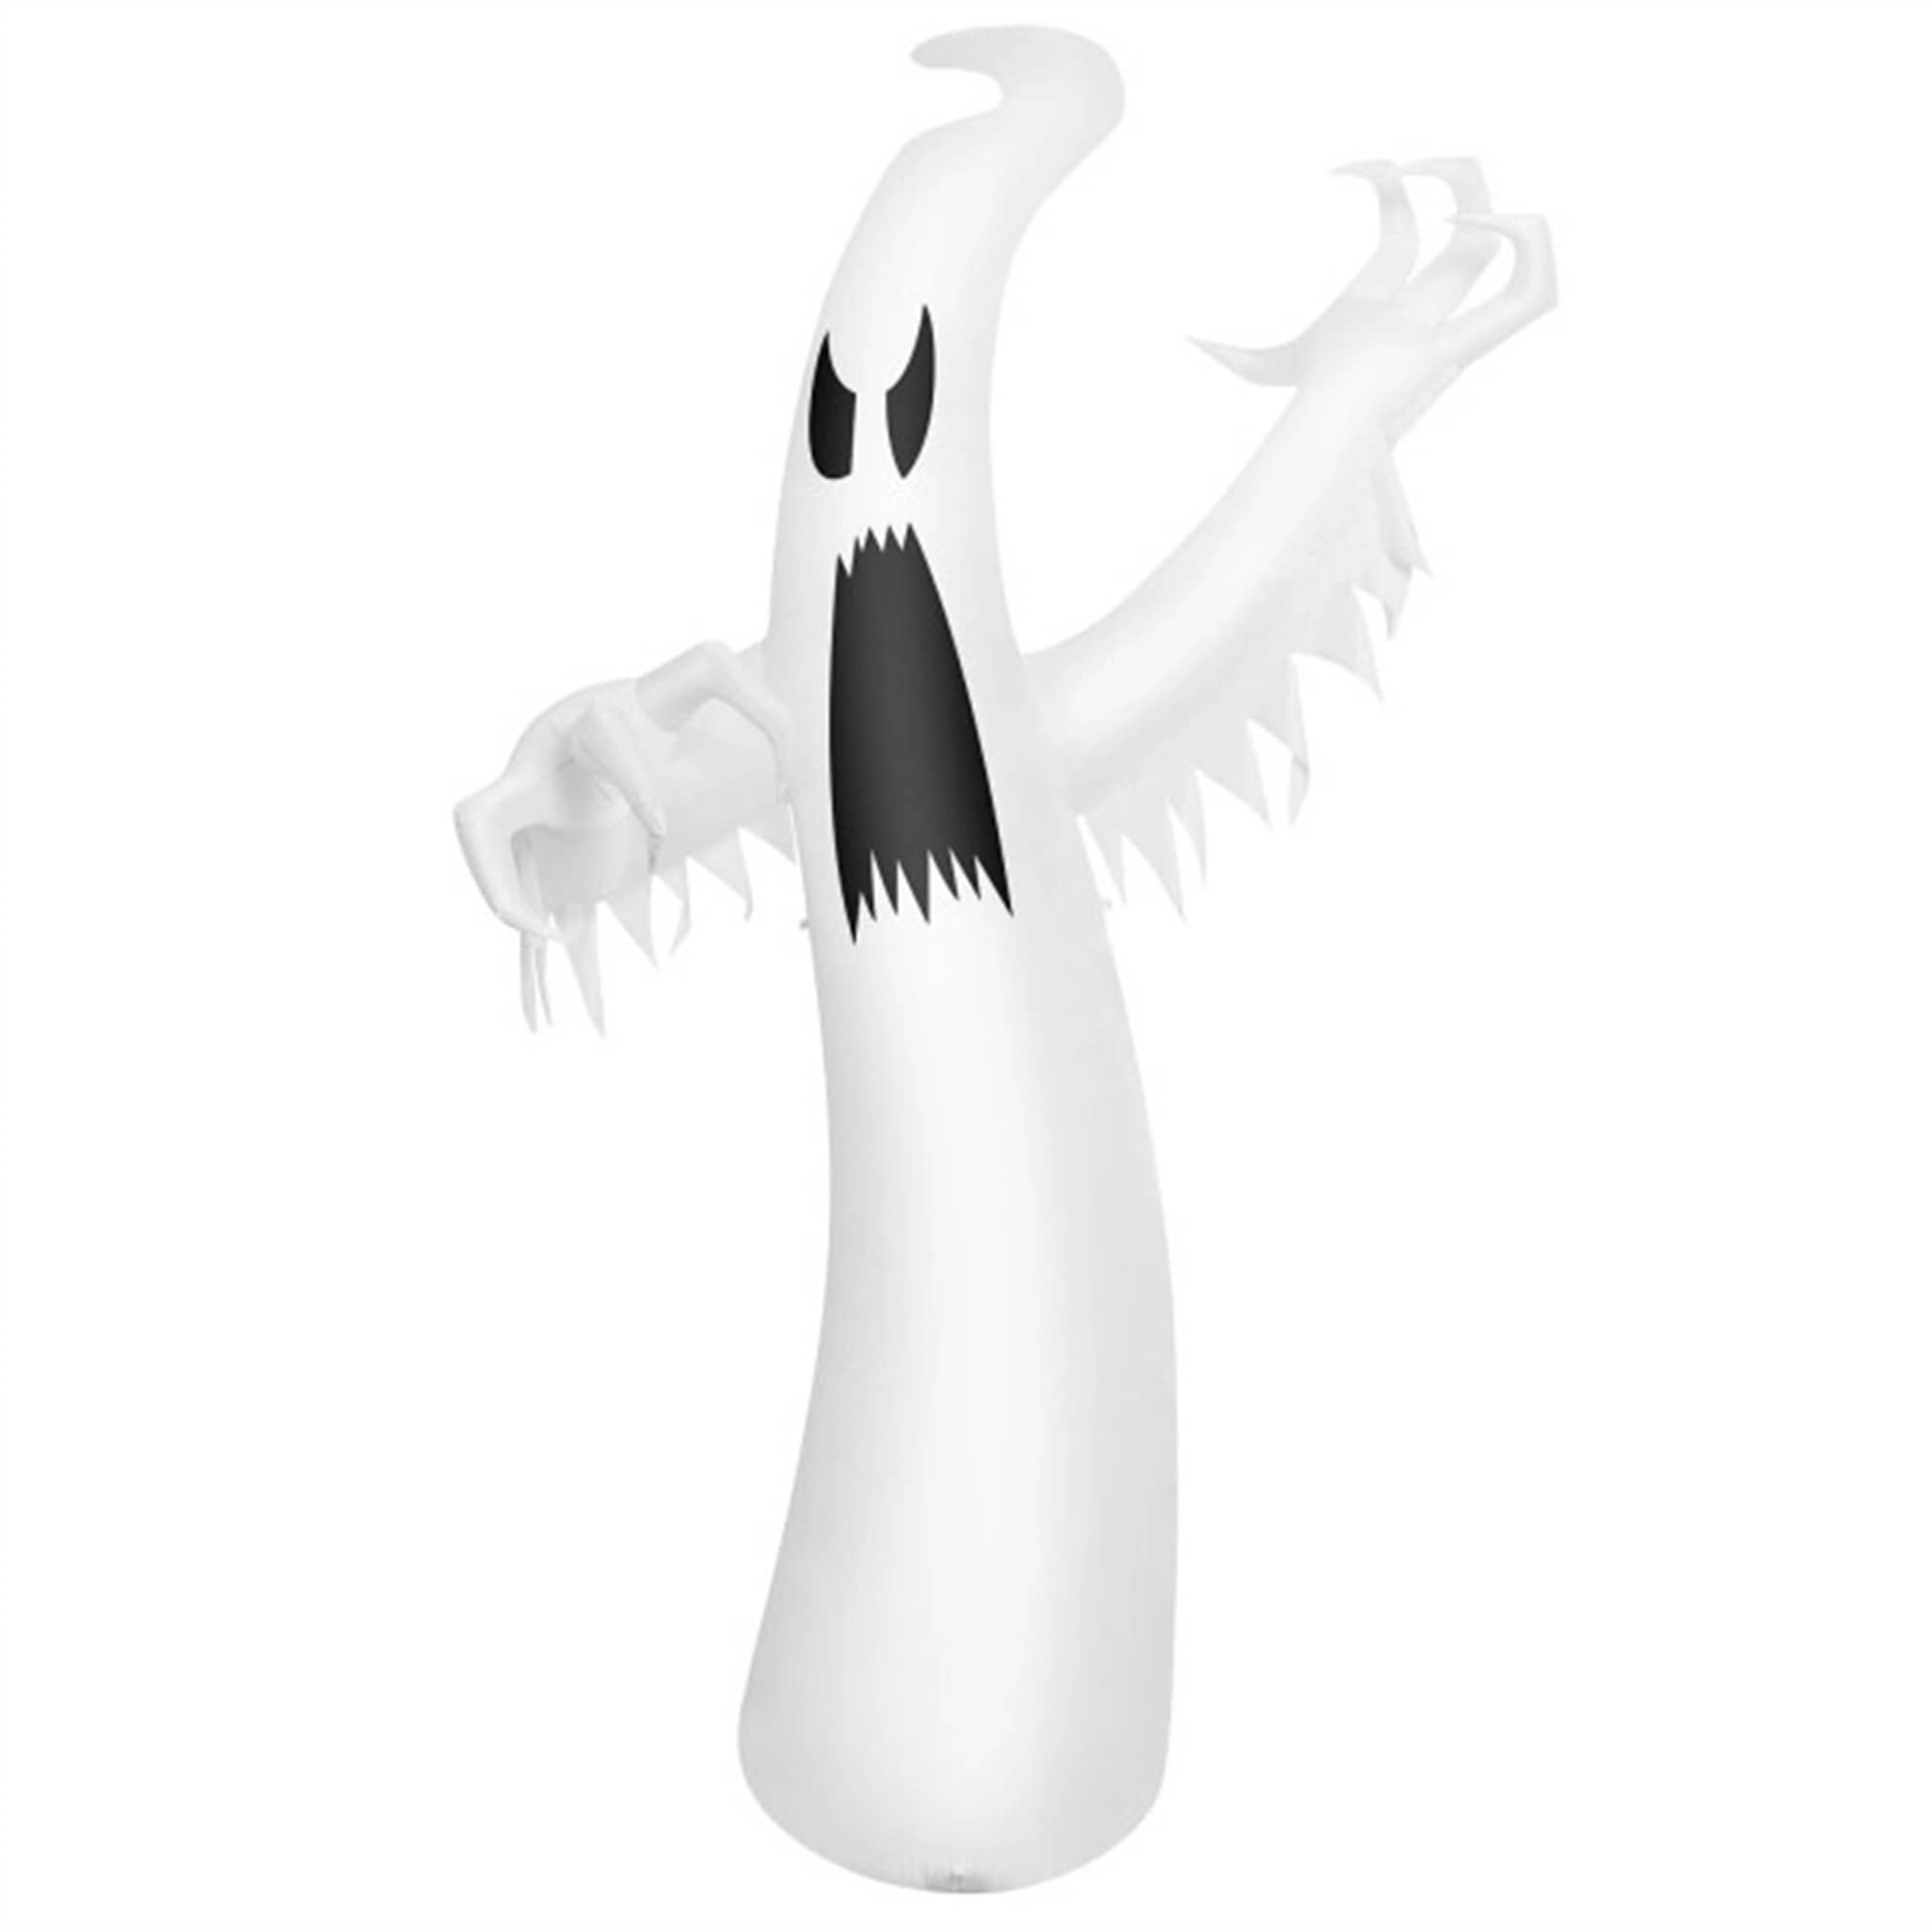 CASAINC 12 Feet Halloween Inflatable Ghost with LED Lights